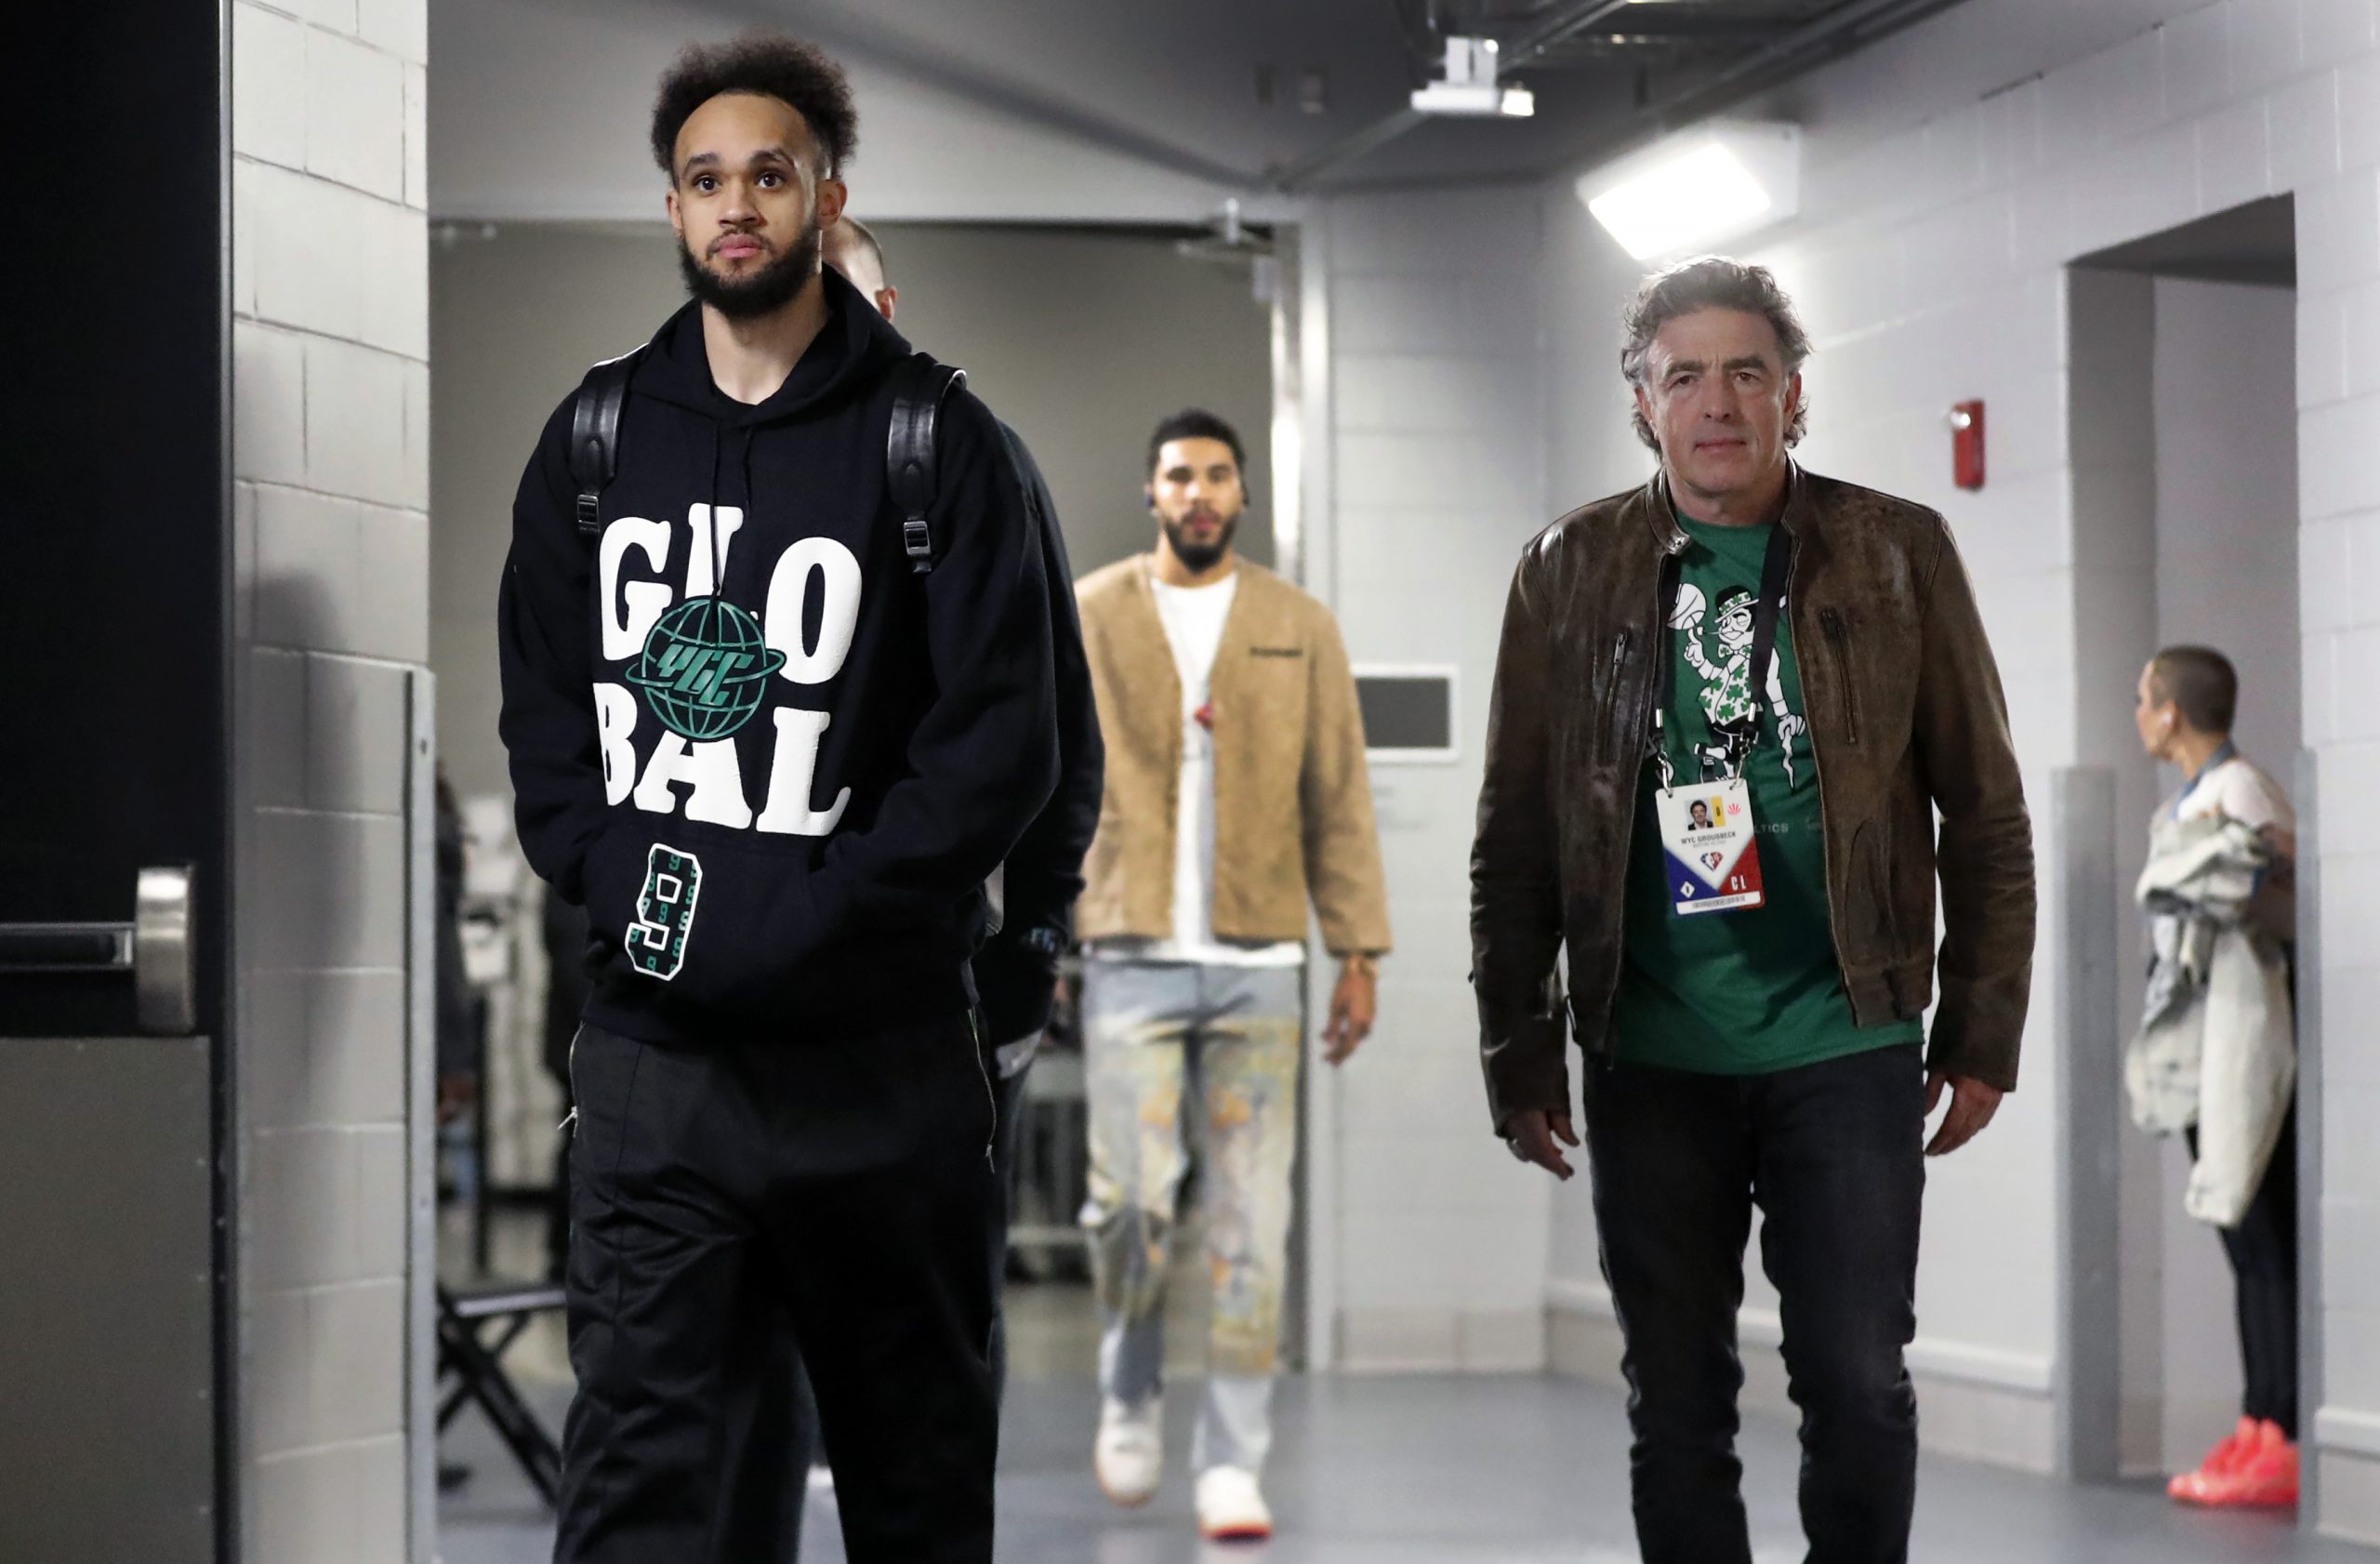 Boston Celtics Co-Owner Wyc Grousbeck: ‘It Pained Me’ to Have to Throw Danny Ainge Out of the Locker Room